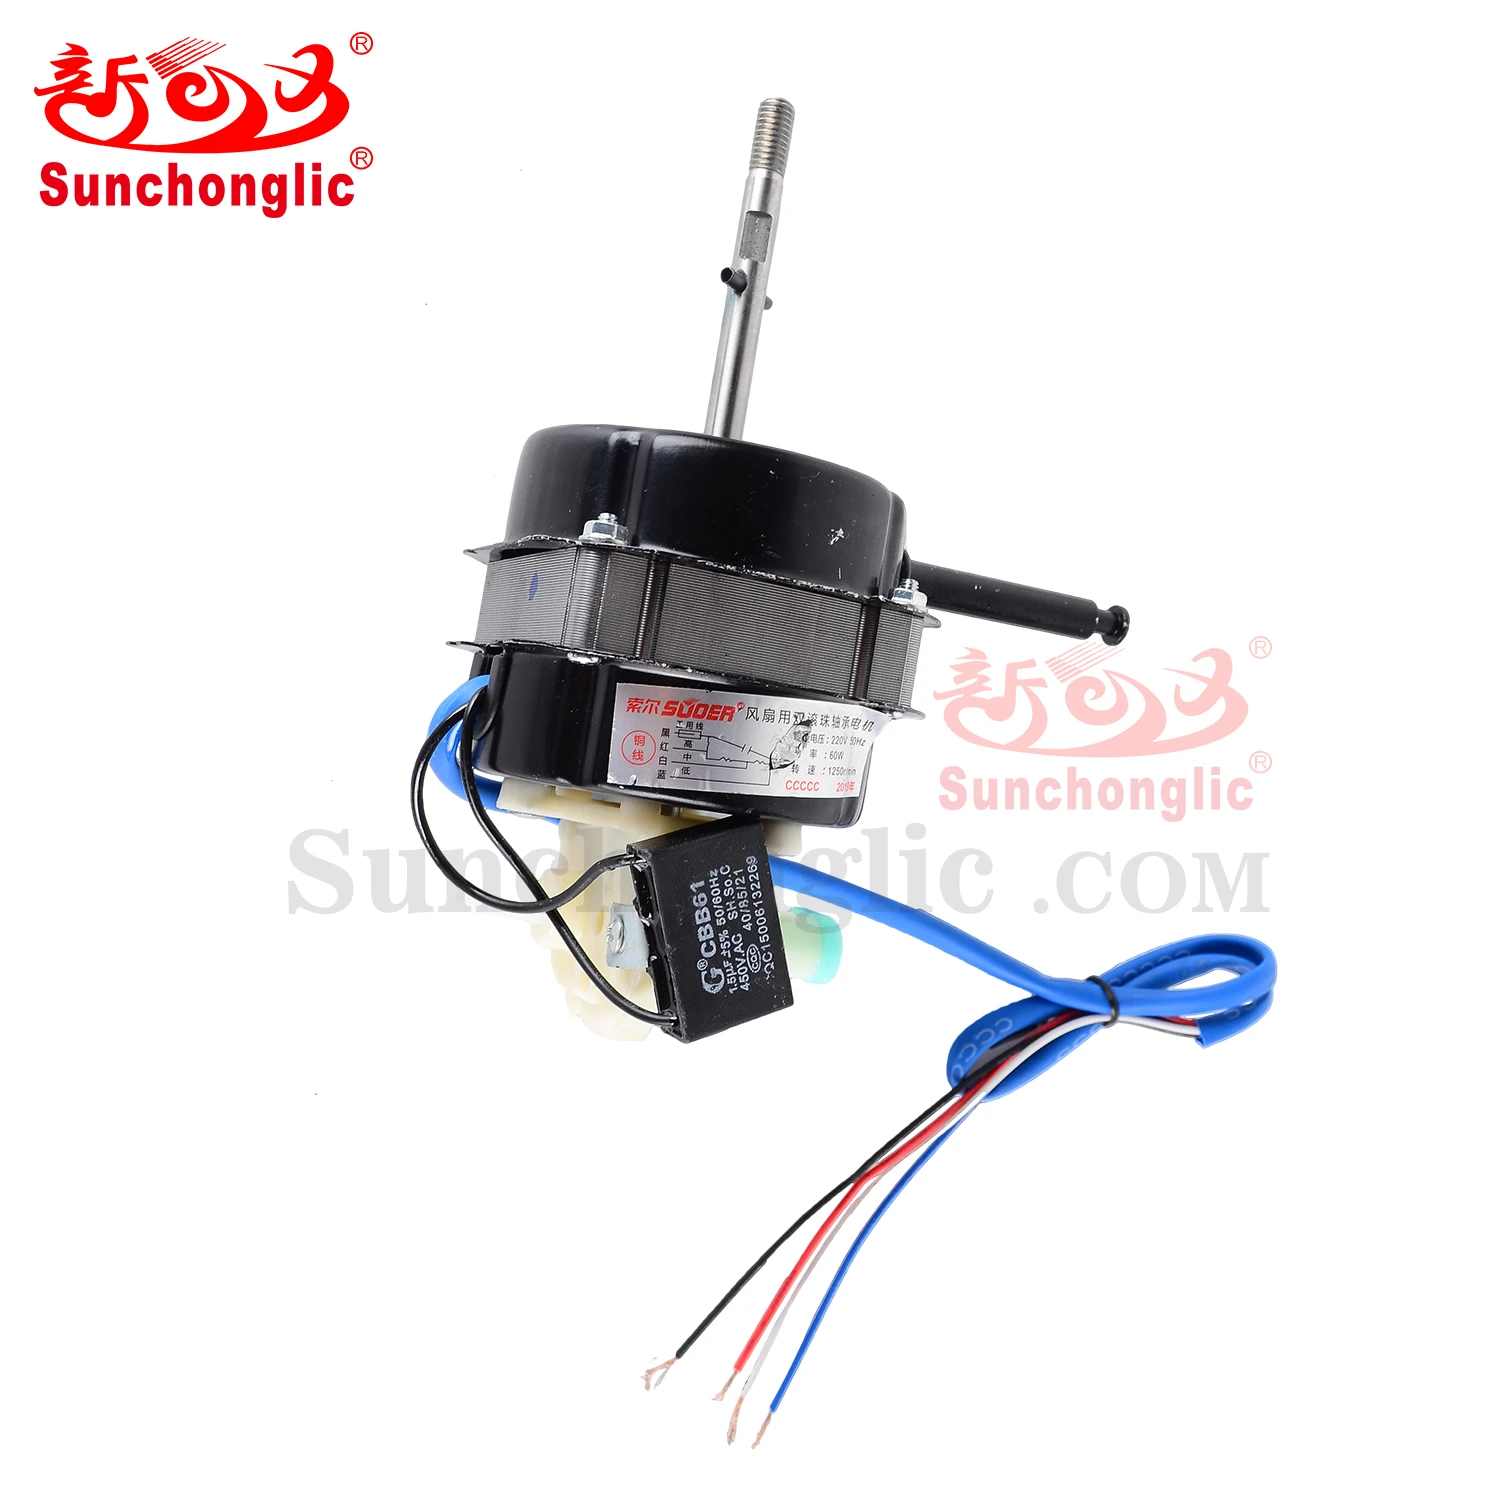 Sunchonglic 60w 18 inches copper coil high speed ac fan motor stand fan motor with capacitor